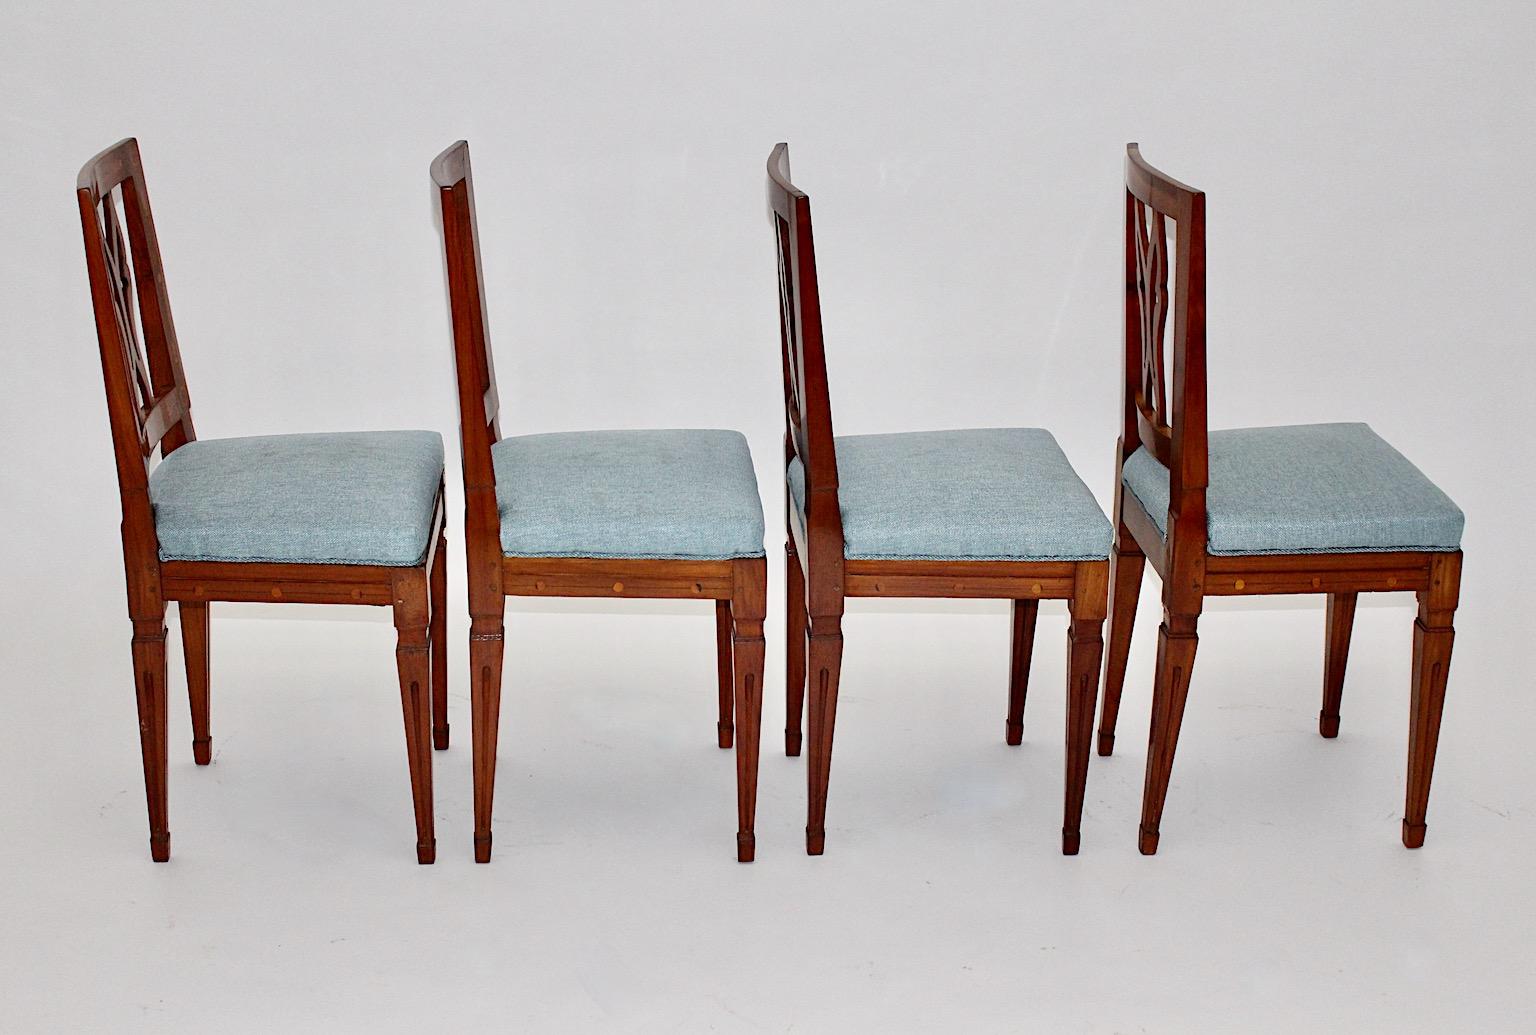 Late 18th Century Cherrywood Maple Blue Upholstery Dining Chairs Set of Four circa 1780 Austria